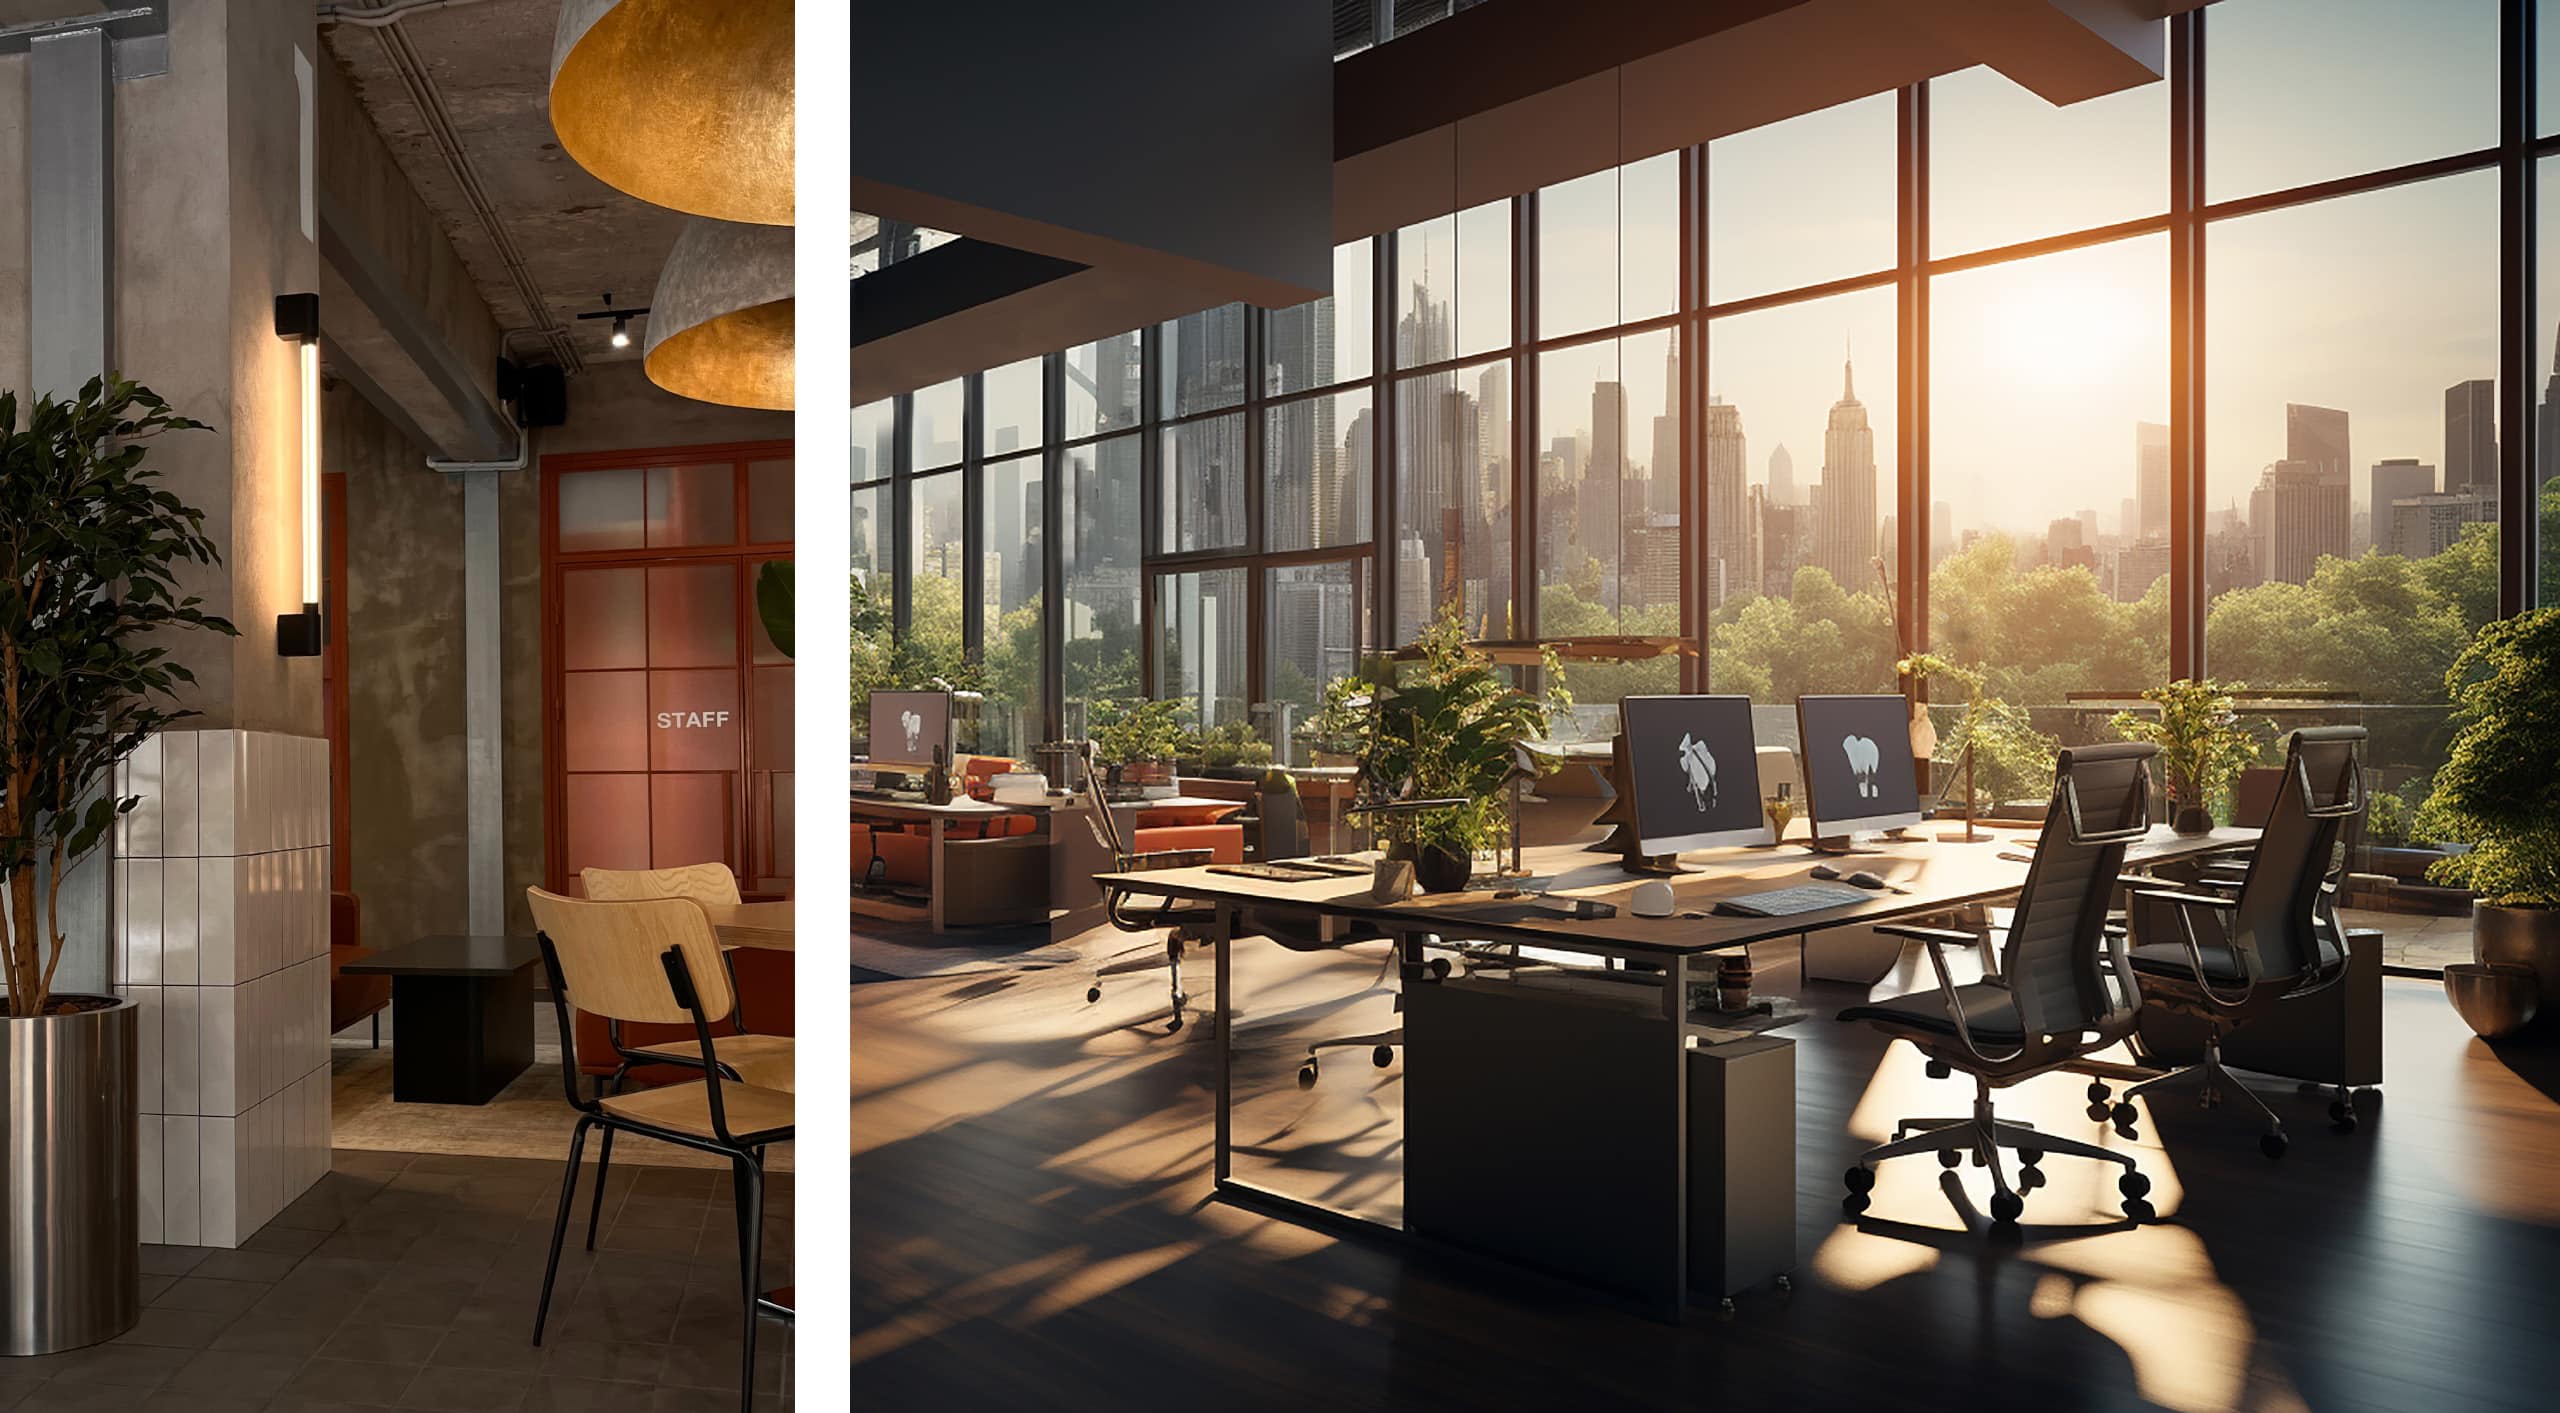 office interiors with no people. large open windows, warm lighting, open plan office